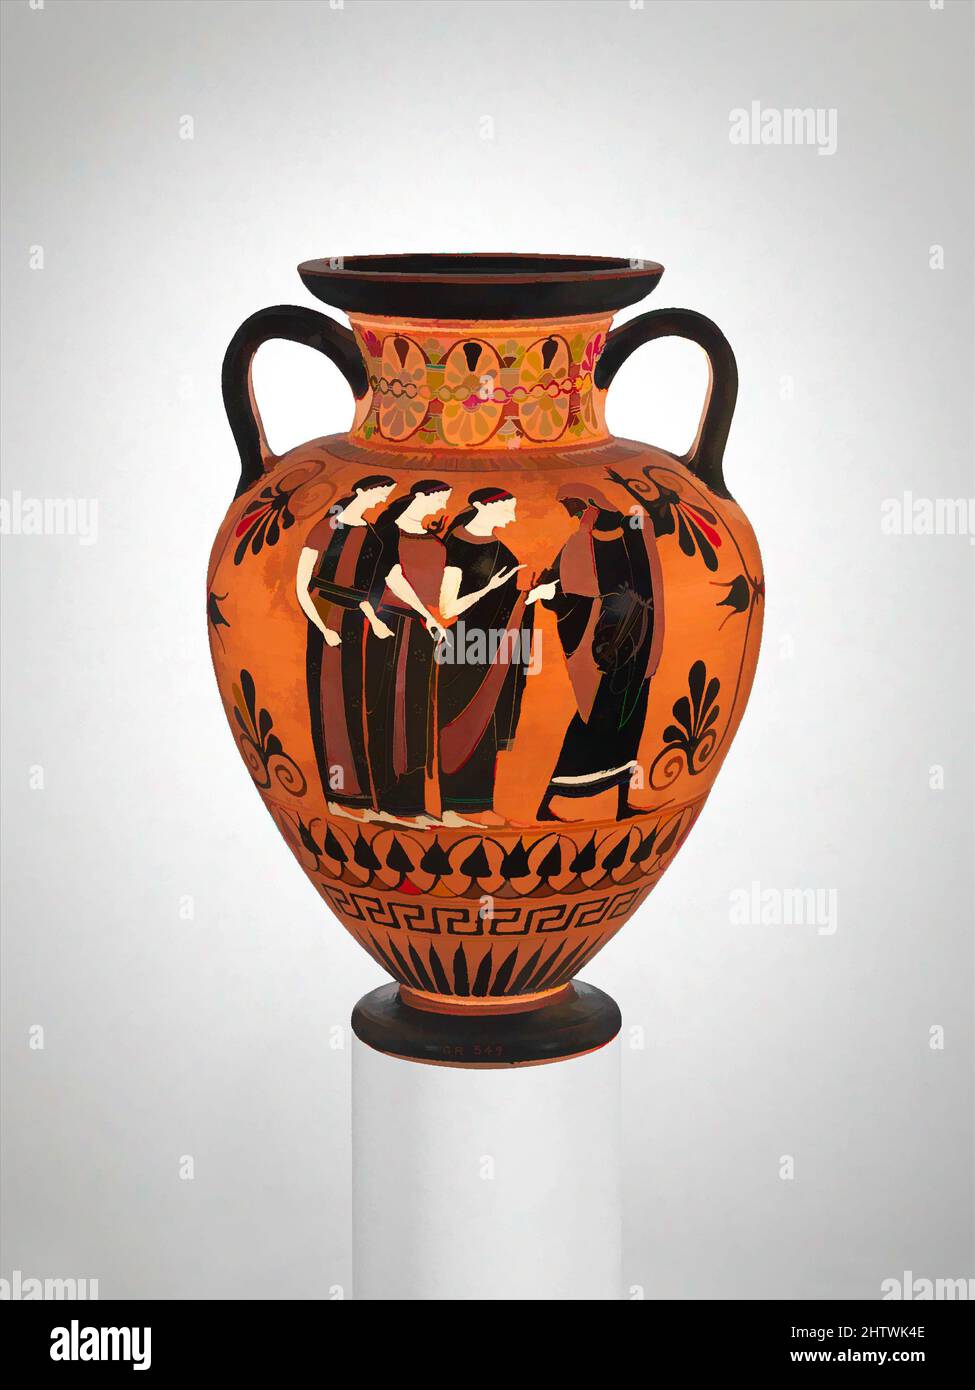 Art inspired by Terracotta neck-amphora (jar), Archaic, ca. 540–530 B.C., Greek, Attic, Terracotta; black-figure, H. 14 3/4 in. (37.5 cm), Vases, Obverse, Poseidon fighting giant Reverse, Judgement of Paris The gods of Mount Olympos had to overcome several threats before their primacy, Classic works modernized by Artotop with a splash of modernity. Shapes, color and value, eye-catching visual impact on art. Emotions through freedom of artworks in a contemporary way. A timeless message pursuing a wildly creative new direction. Artists turning to the digital medium and creating the Artotop NFT Stock Photo